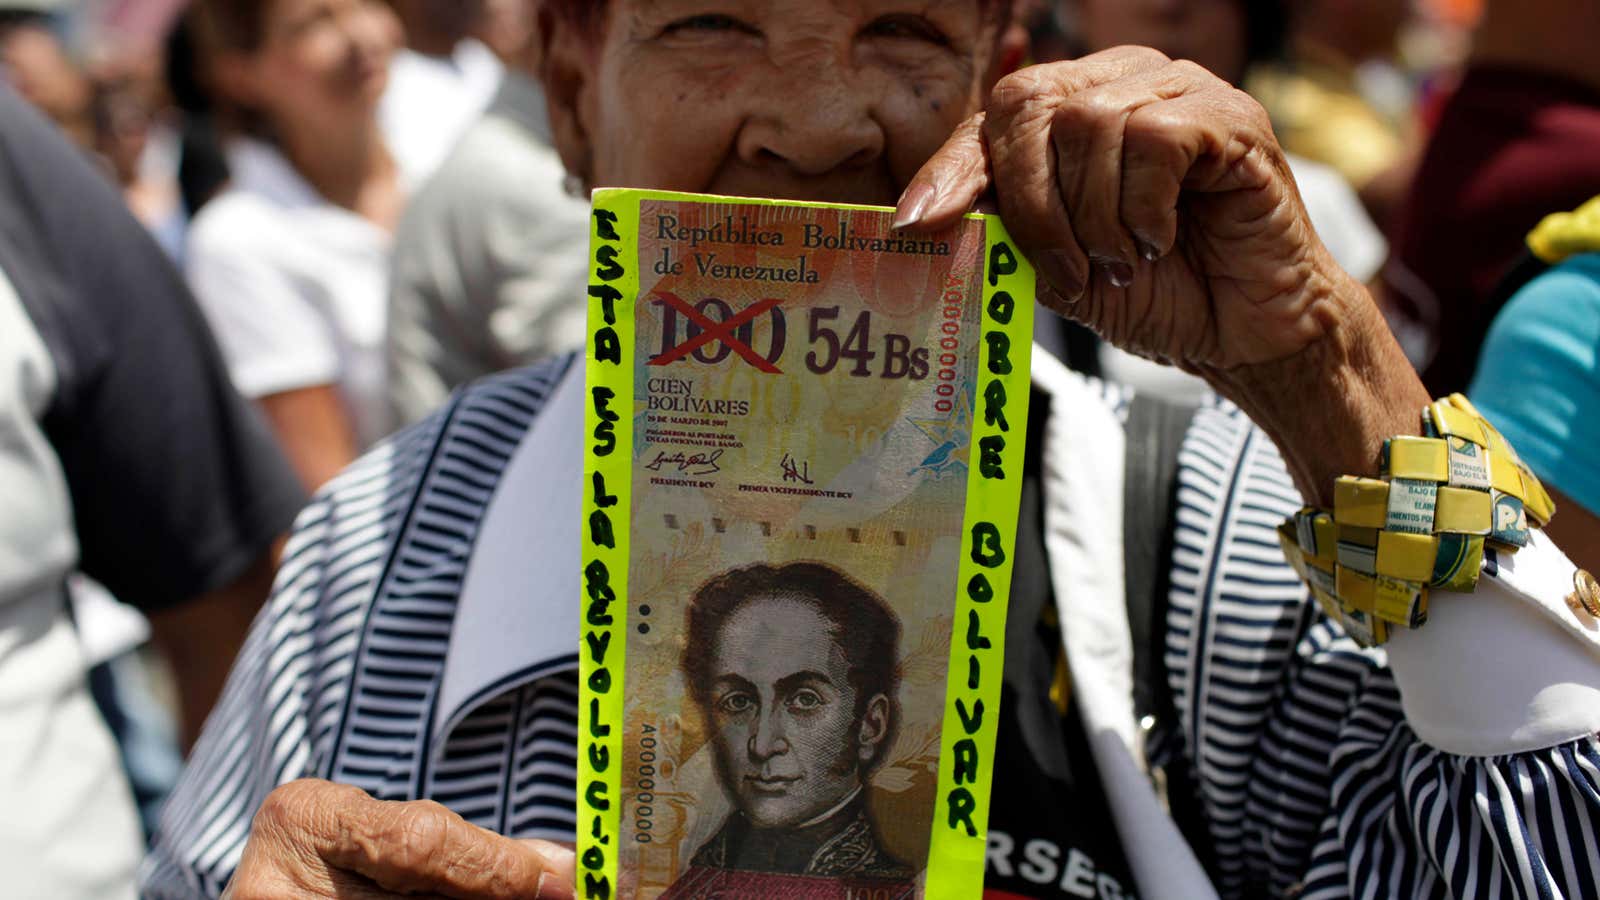 Devaluing the “poor Bolivar” has consequences around the world.